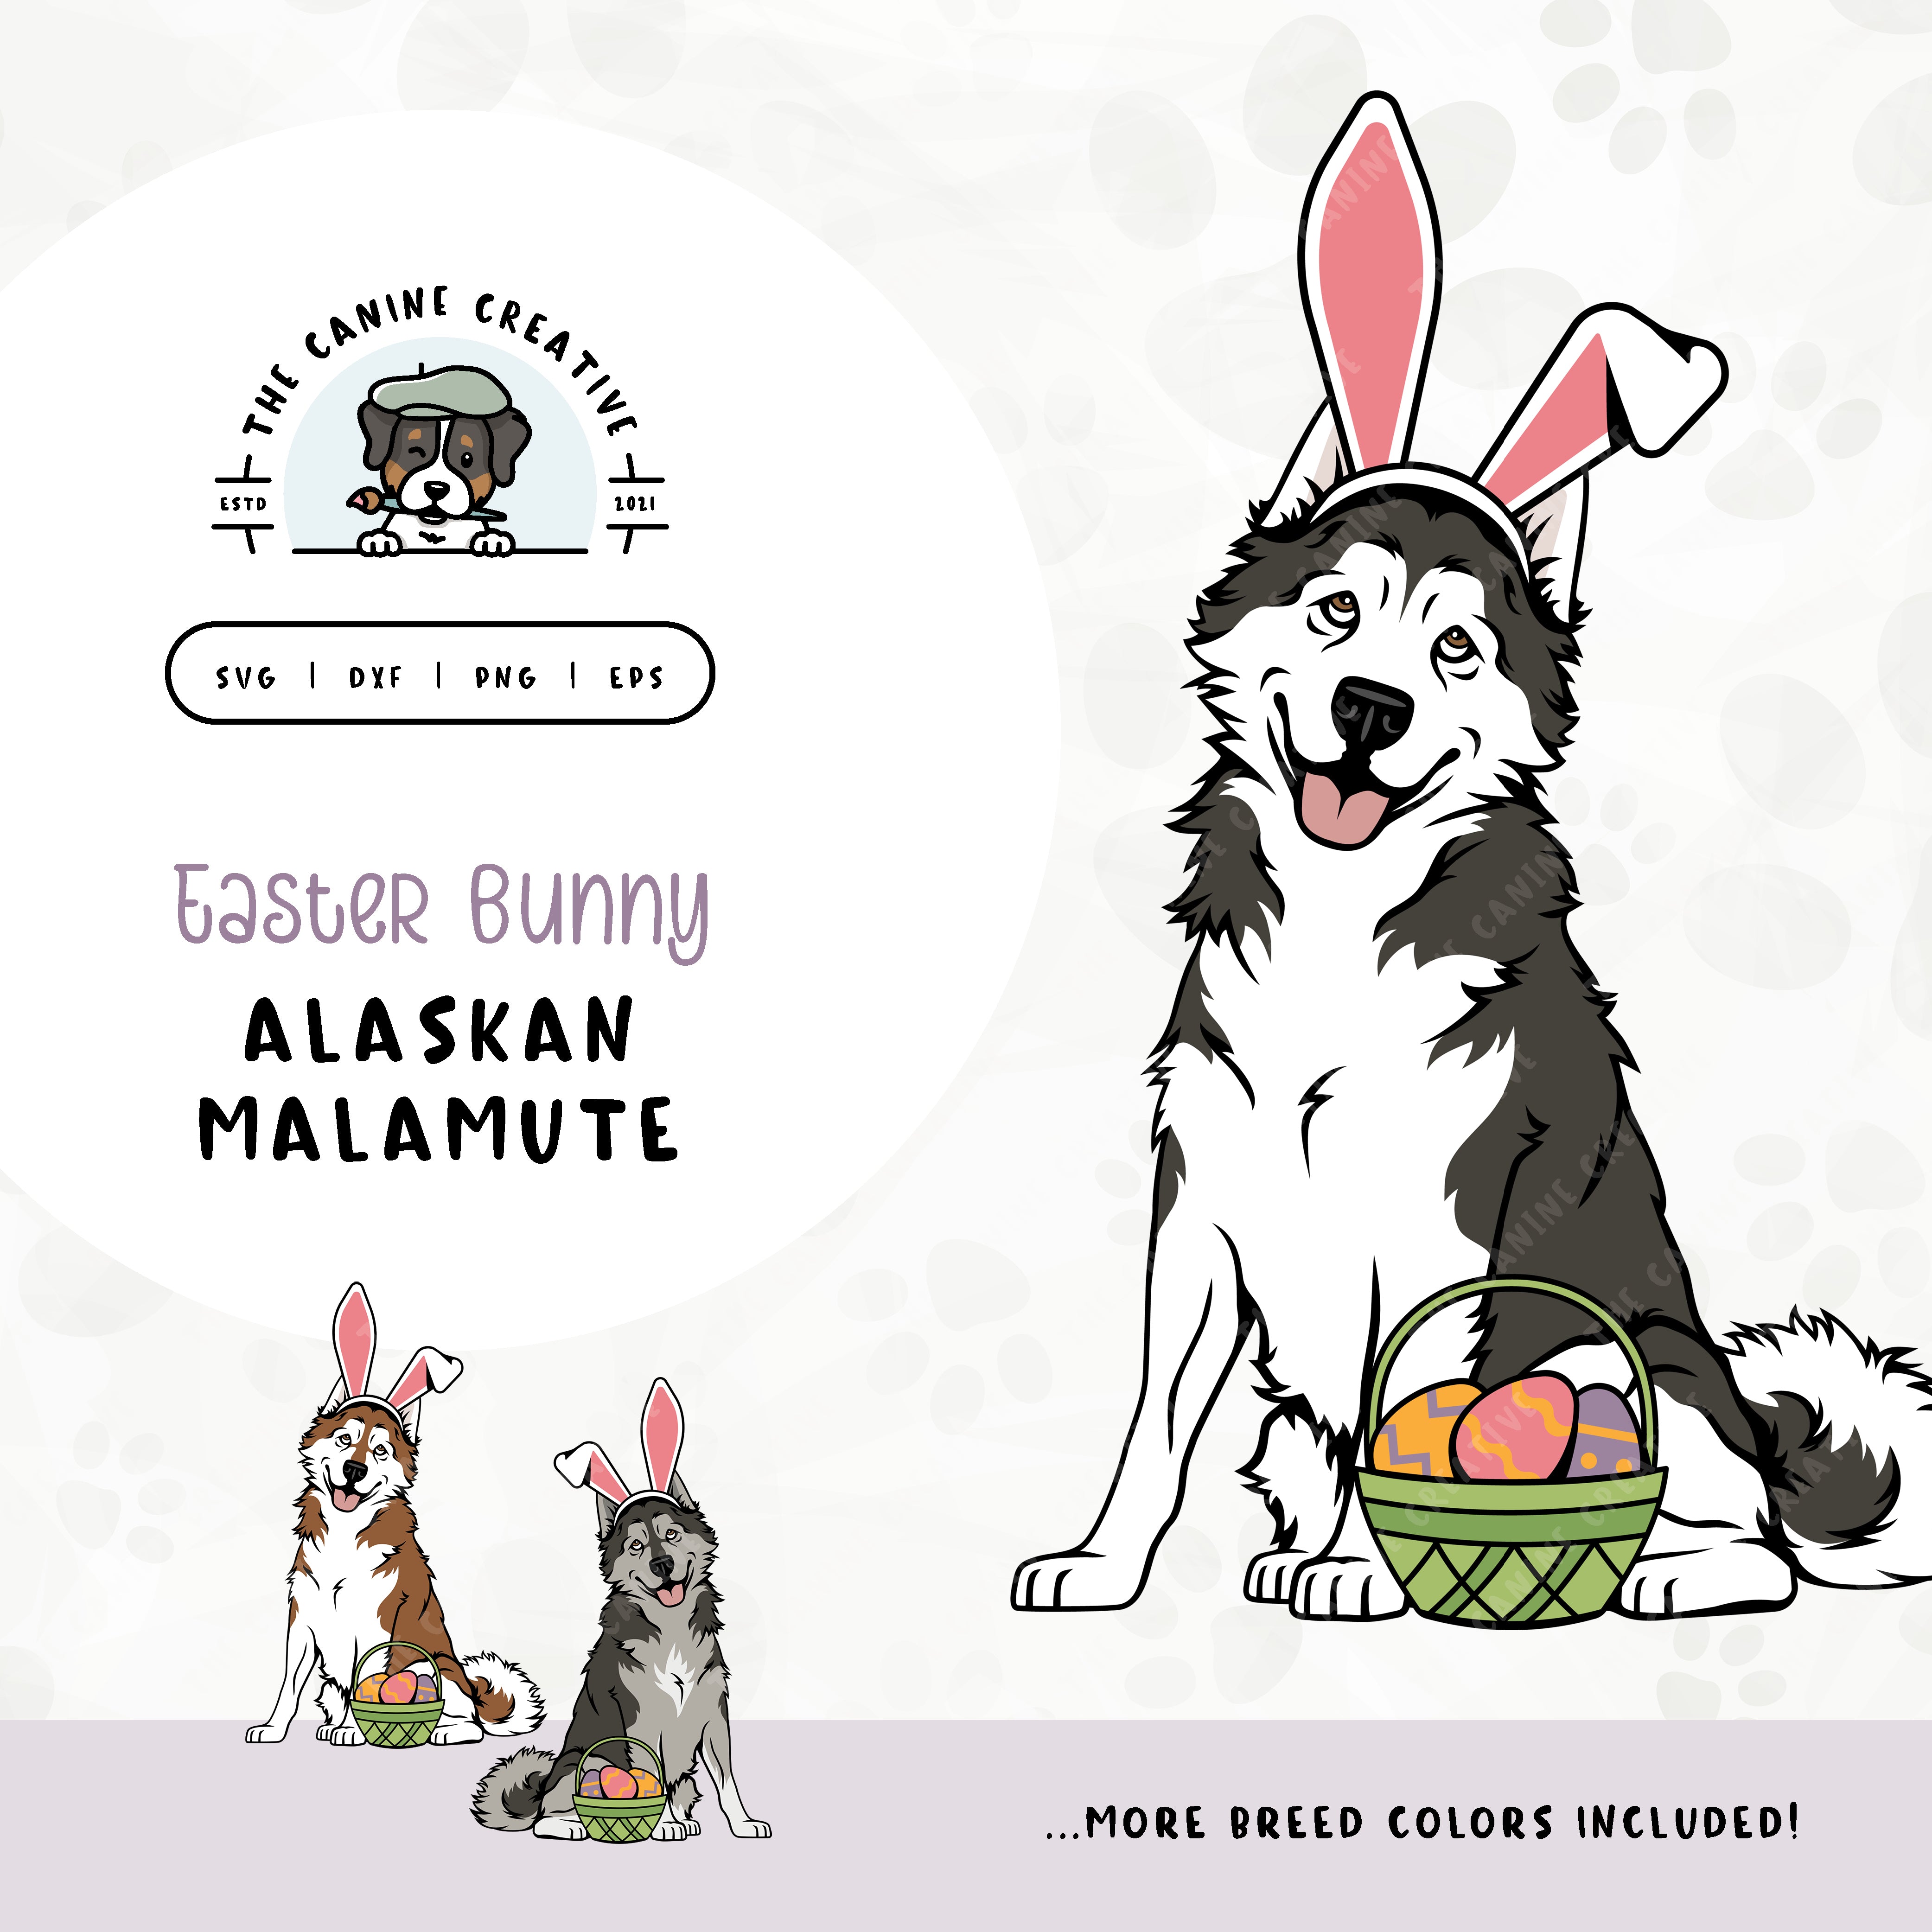 This springtime illustration features an Alaskan Malamute adorned with festive bunny ears sitting next to a basket of brightly-colored Easter eggs. File formats include: SVG, DXF, PNG, and EPS.